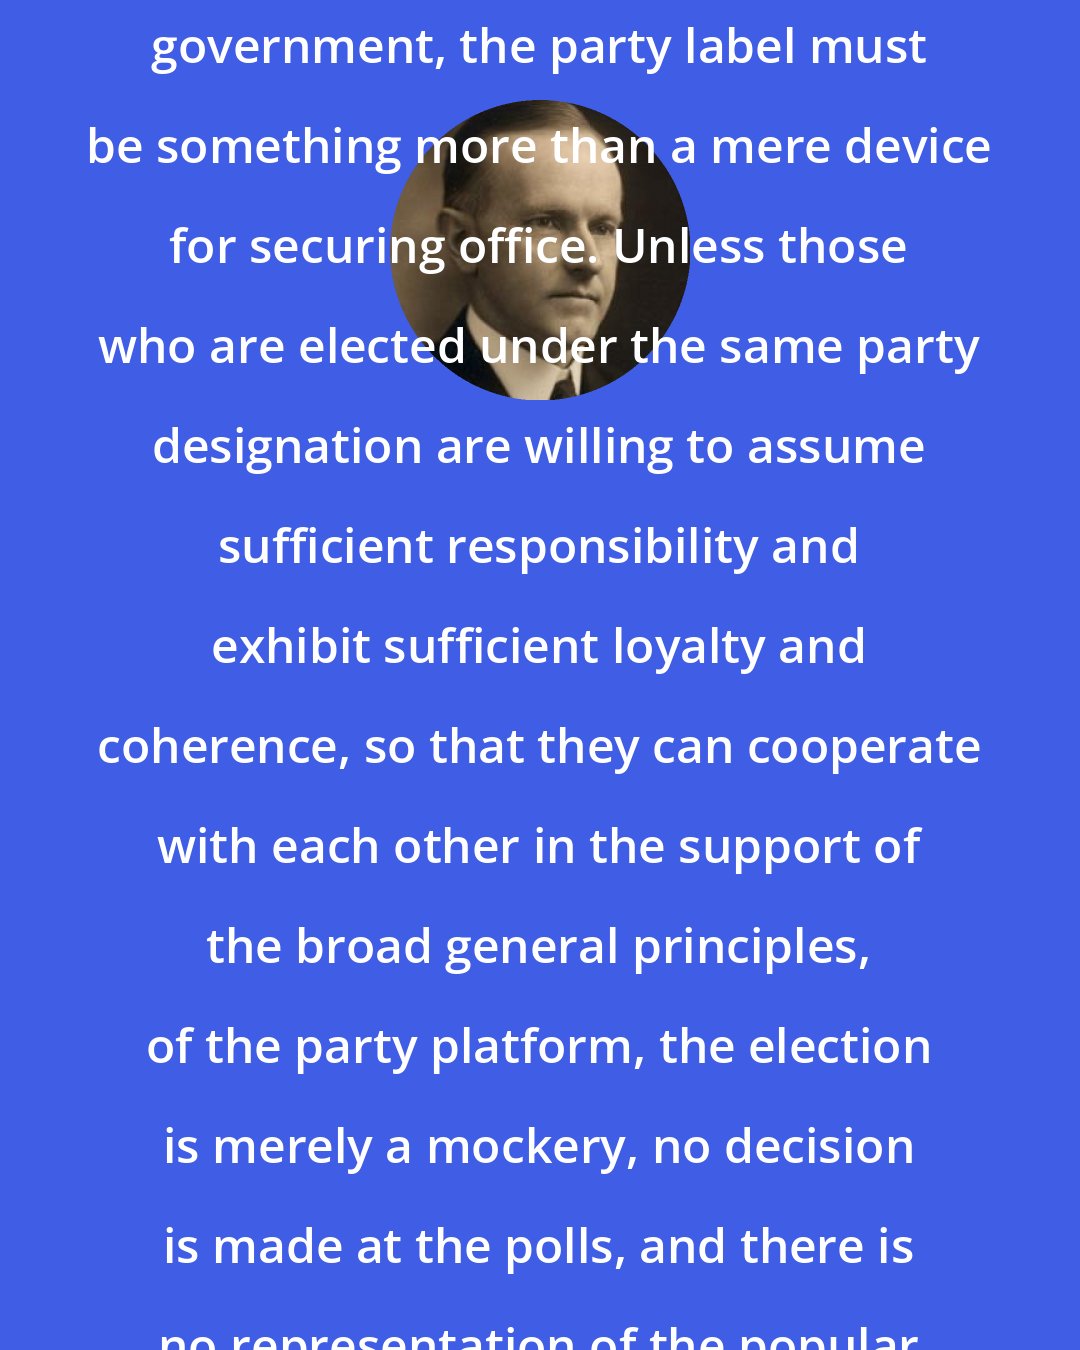 Calvin Coolidge: If there is to be responsible party government, the party label must be something more than a mere device for securing office. Unless those who are elected under the same party designation are willing to assume sufficient responsibility and exhibit sufficient loyalty and coherence, so that they can cooperate with each other in the support of the broad general principles, of the party platform, the election is merely a mockery, no decision is made at the polls, and there is no representation of the popular will.